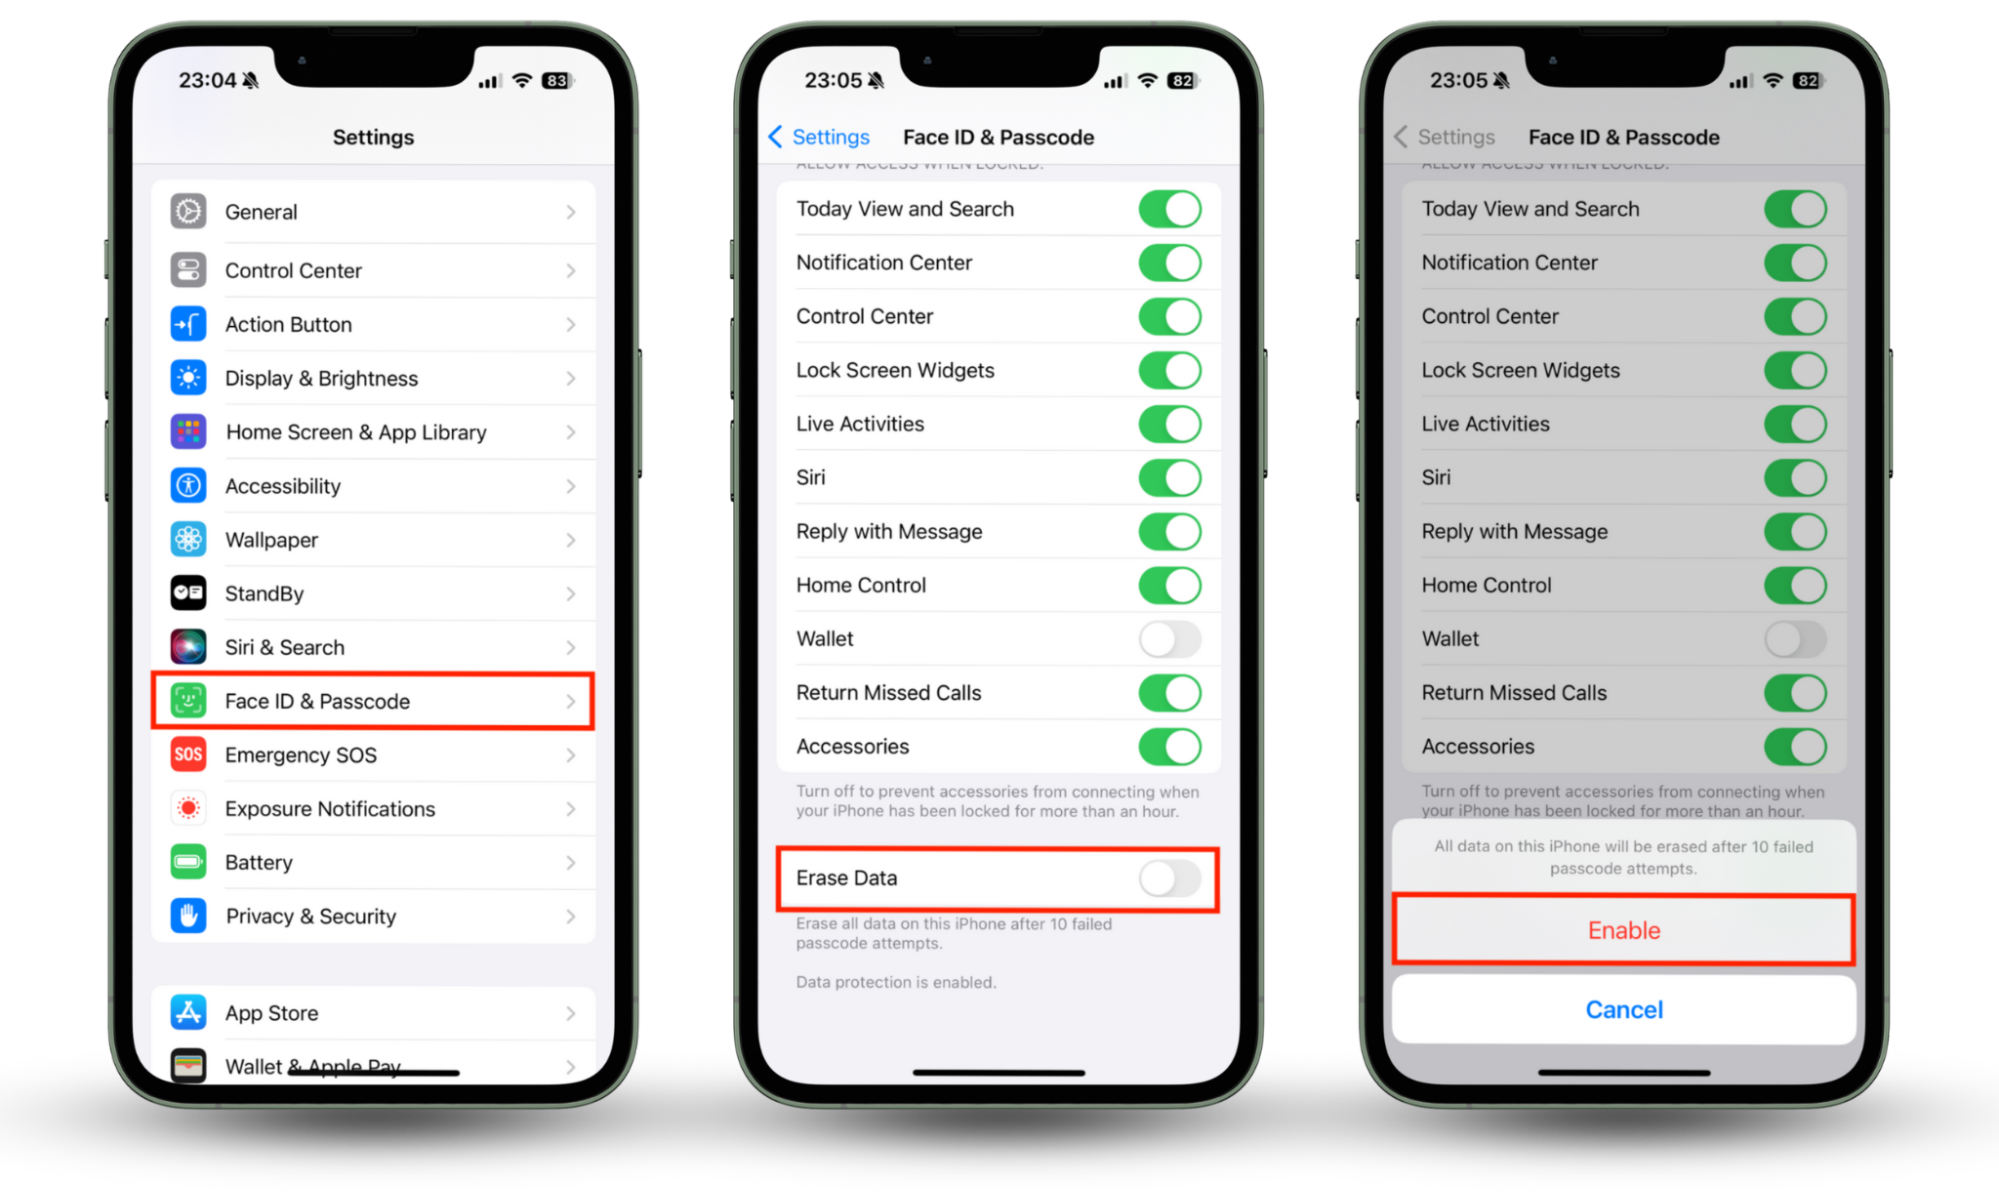 The Erase Data feature inside the Face ID menu on iPhone. Go to Settings > Face ID & Passcode and enable the Erase Data option. This activates self-destruct mode, which clears all data on your iPhone if it is compromised by hackers.